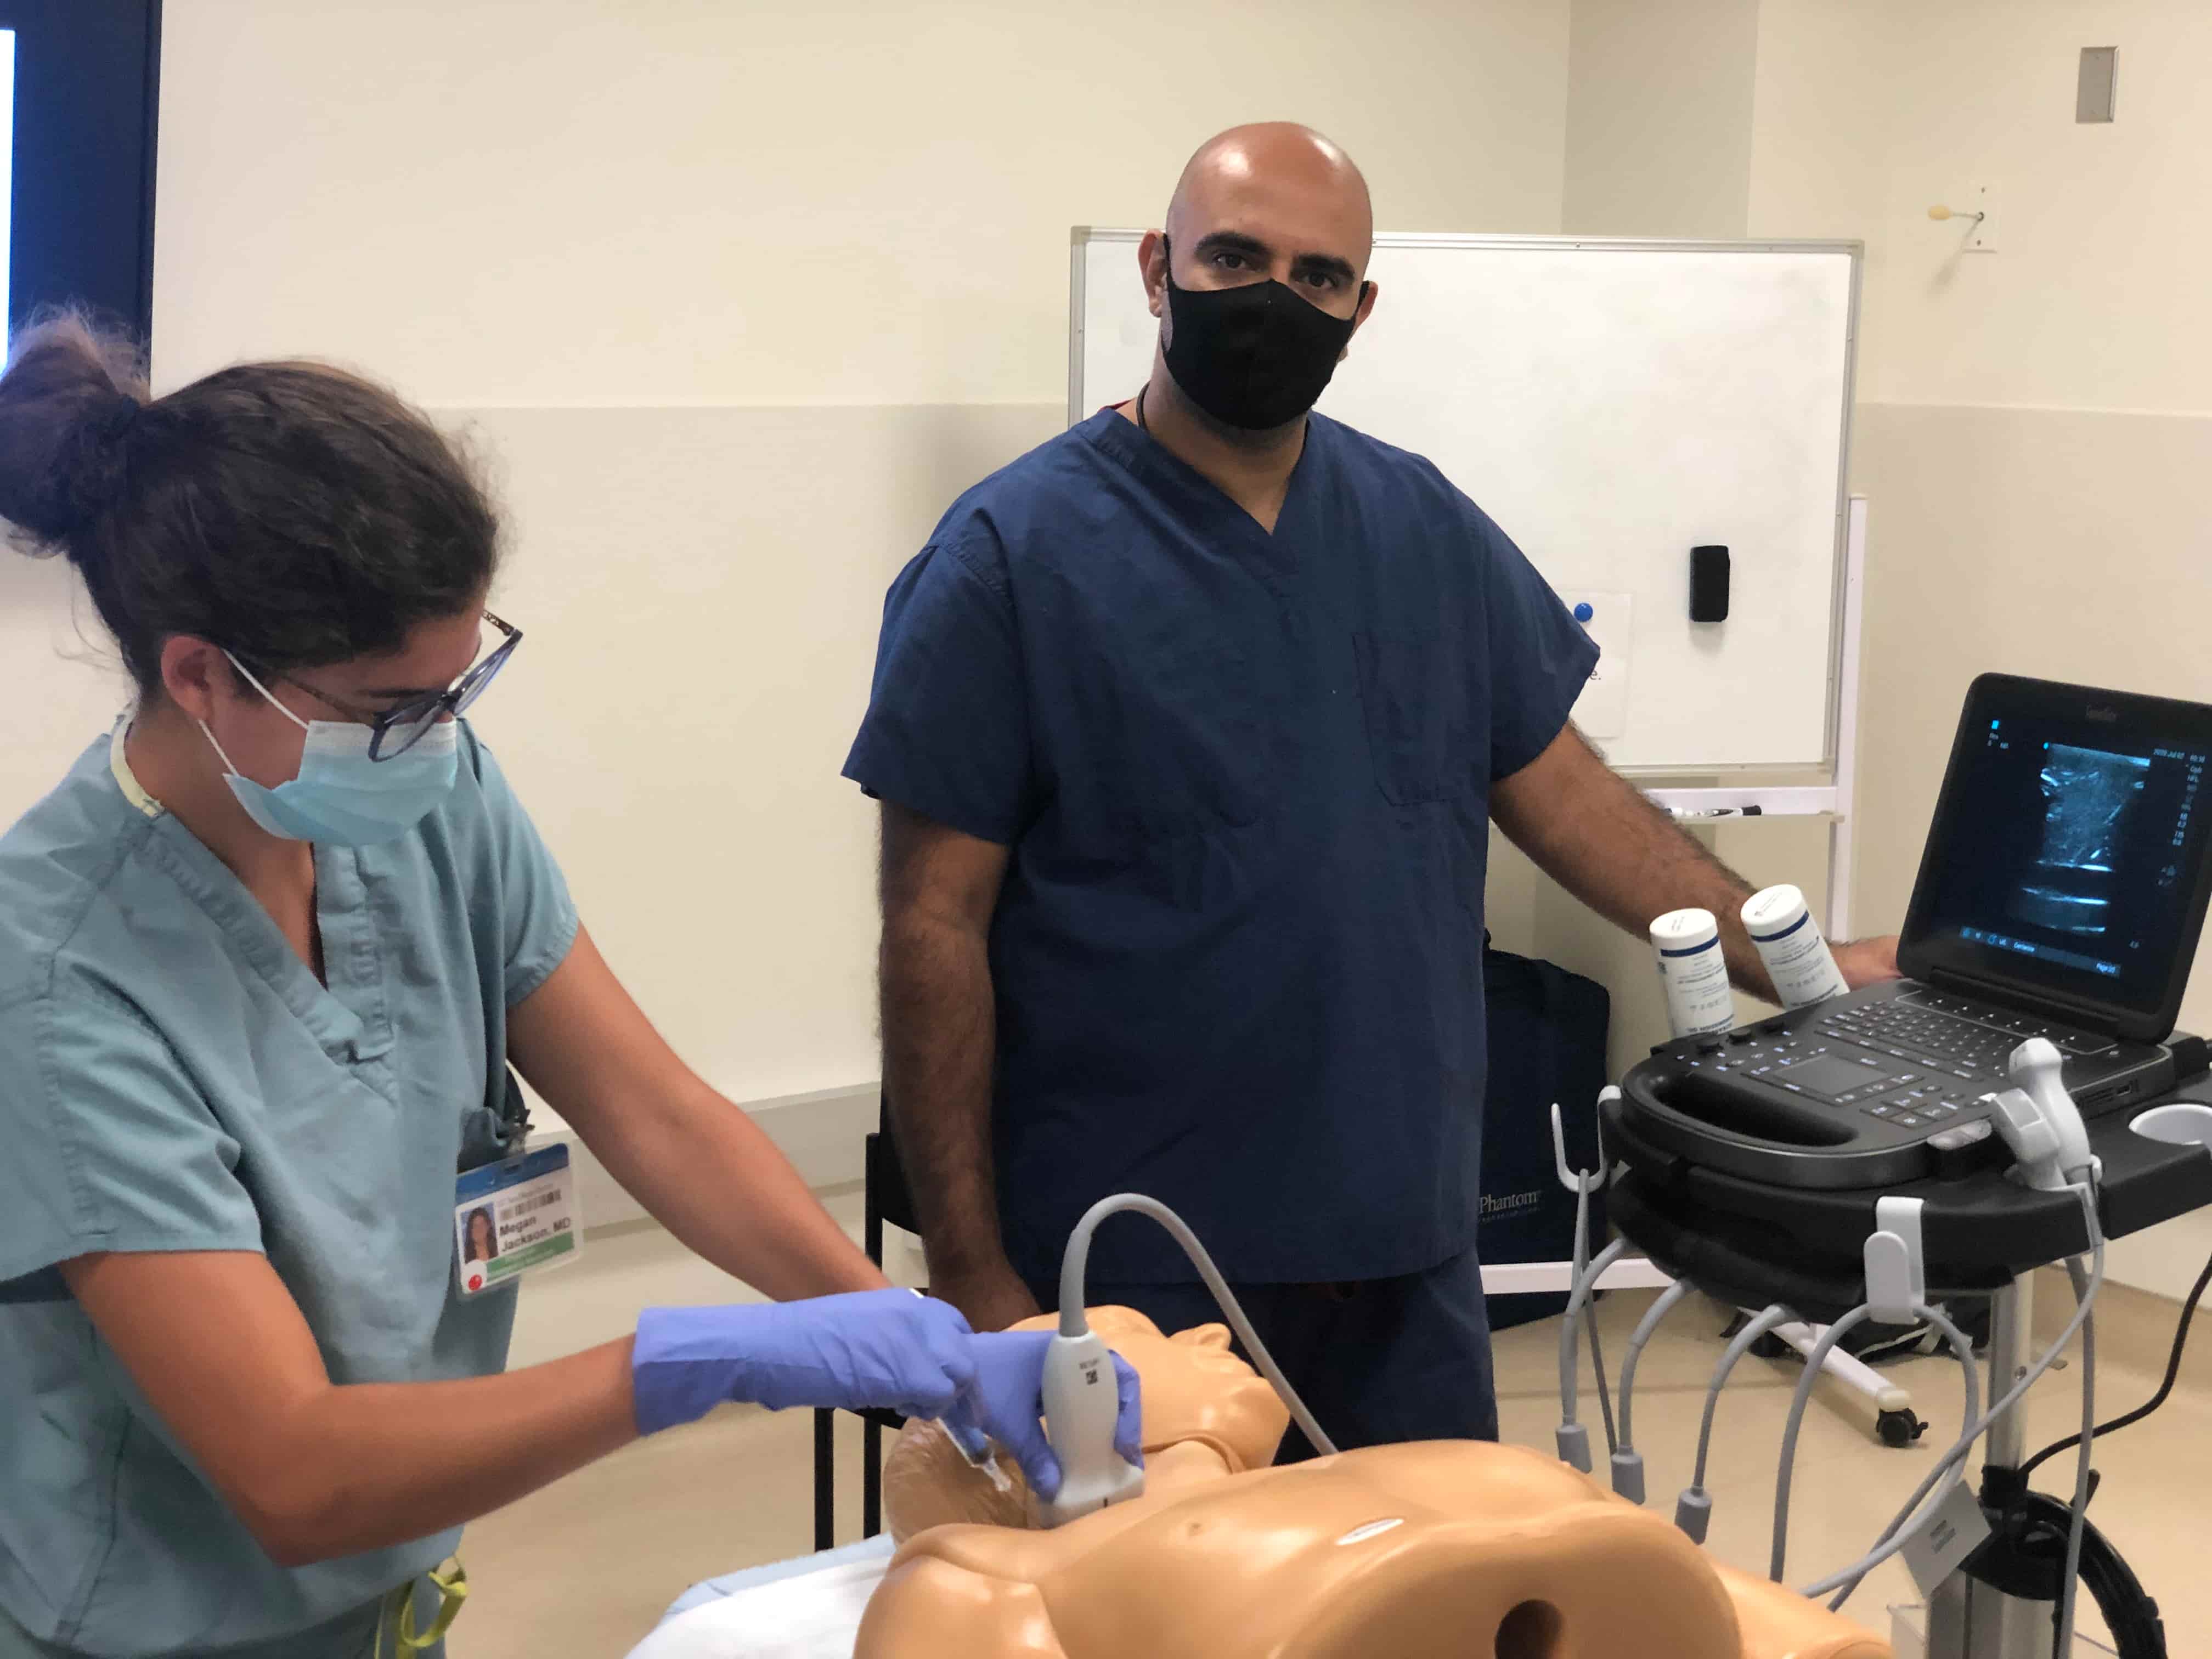 Intern Ultrasound of the Month: POCUS & Regional Wall Motion Abnormalities  — University Hospitals Emergency Medicine Residency